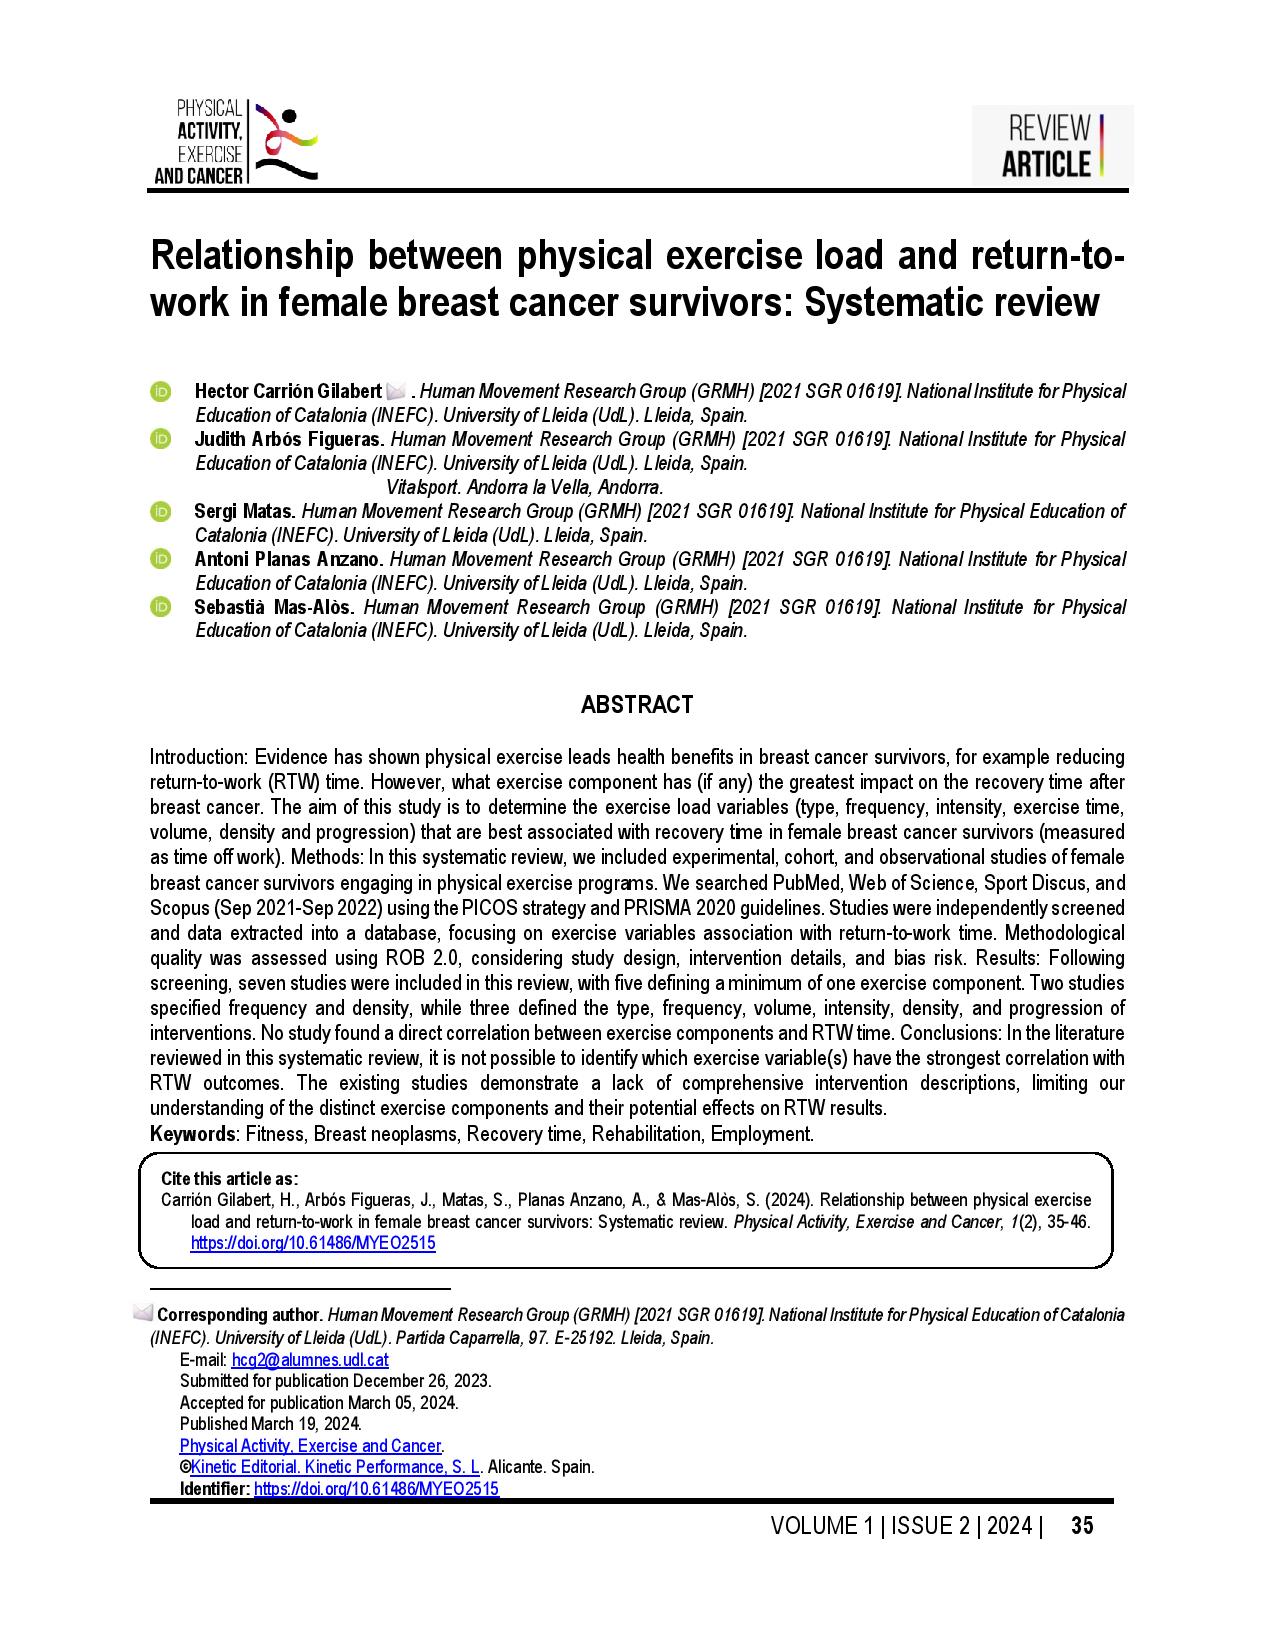 Relationship between physical exercise load and return-to-work in female breast cancer survivors: Systematic review